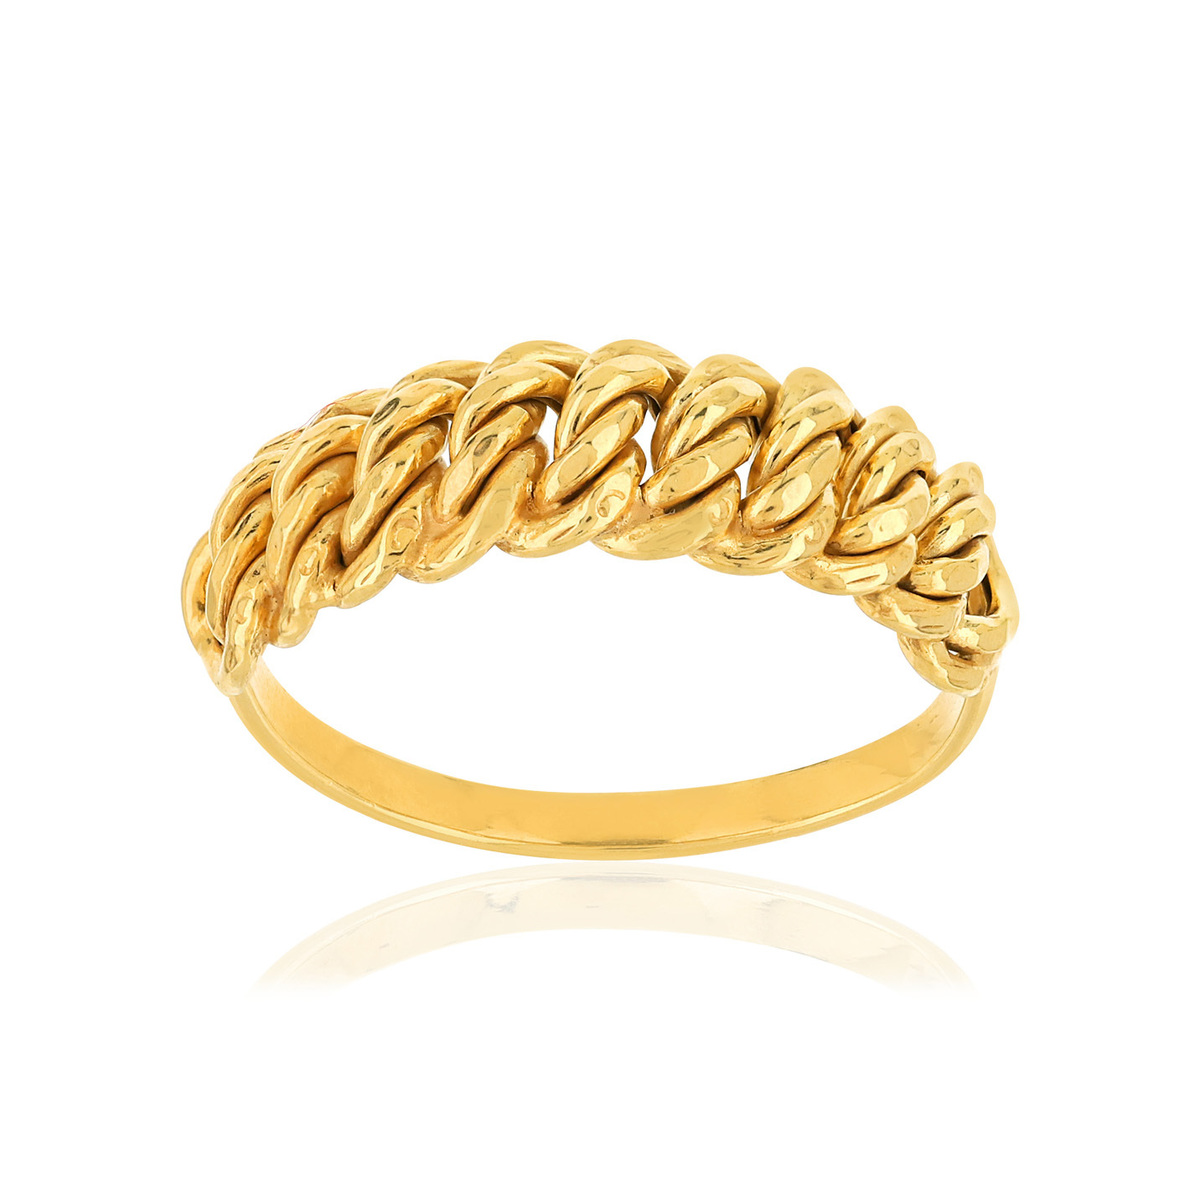 Bague or 375 jaune maille